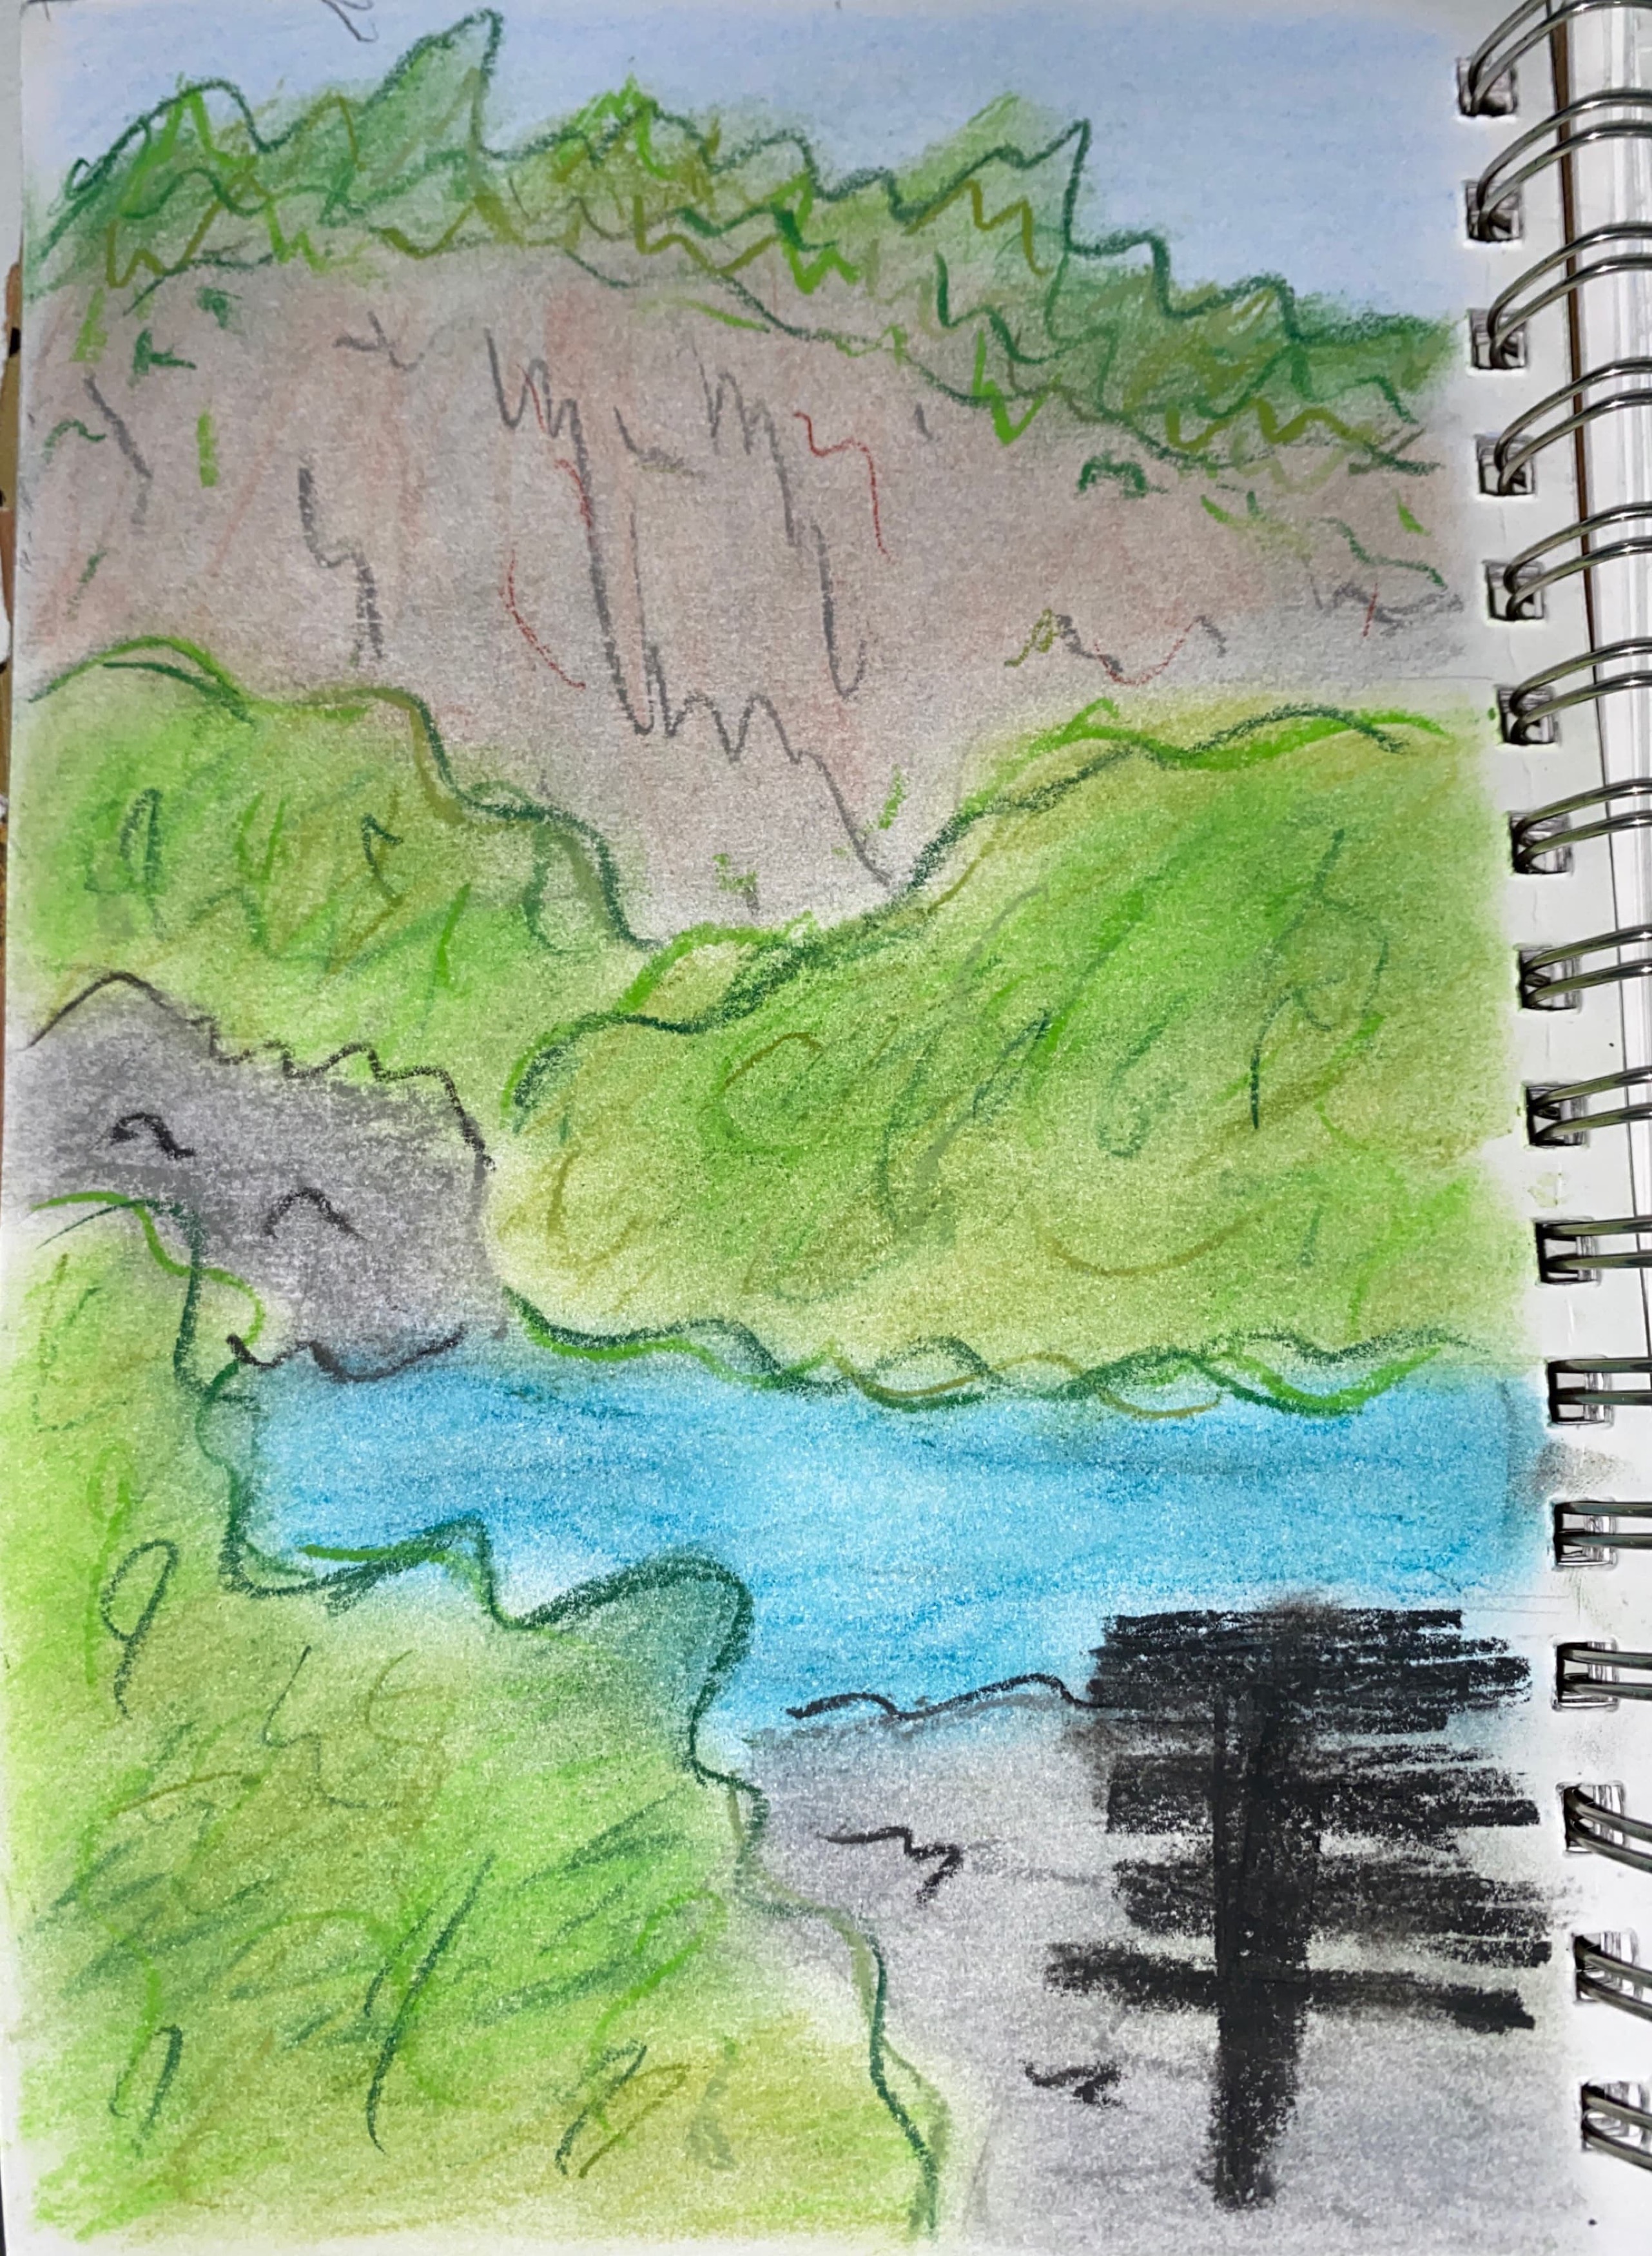 a pastel drawing of a bench in front of a lake. across the lake there is a cliff